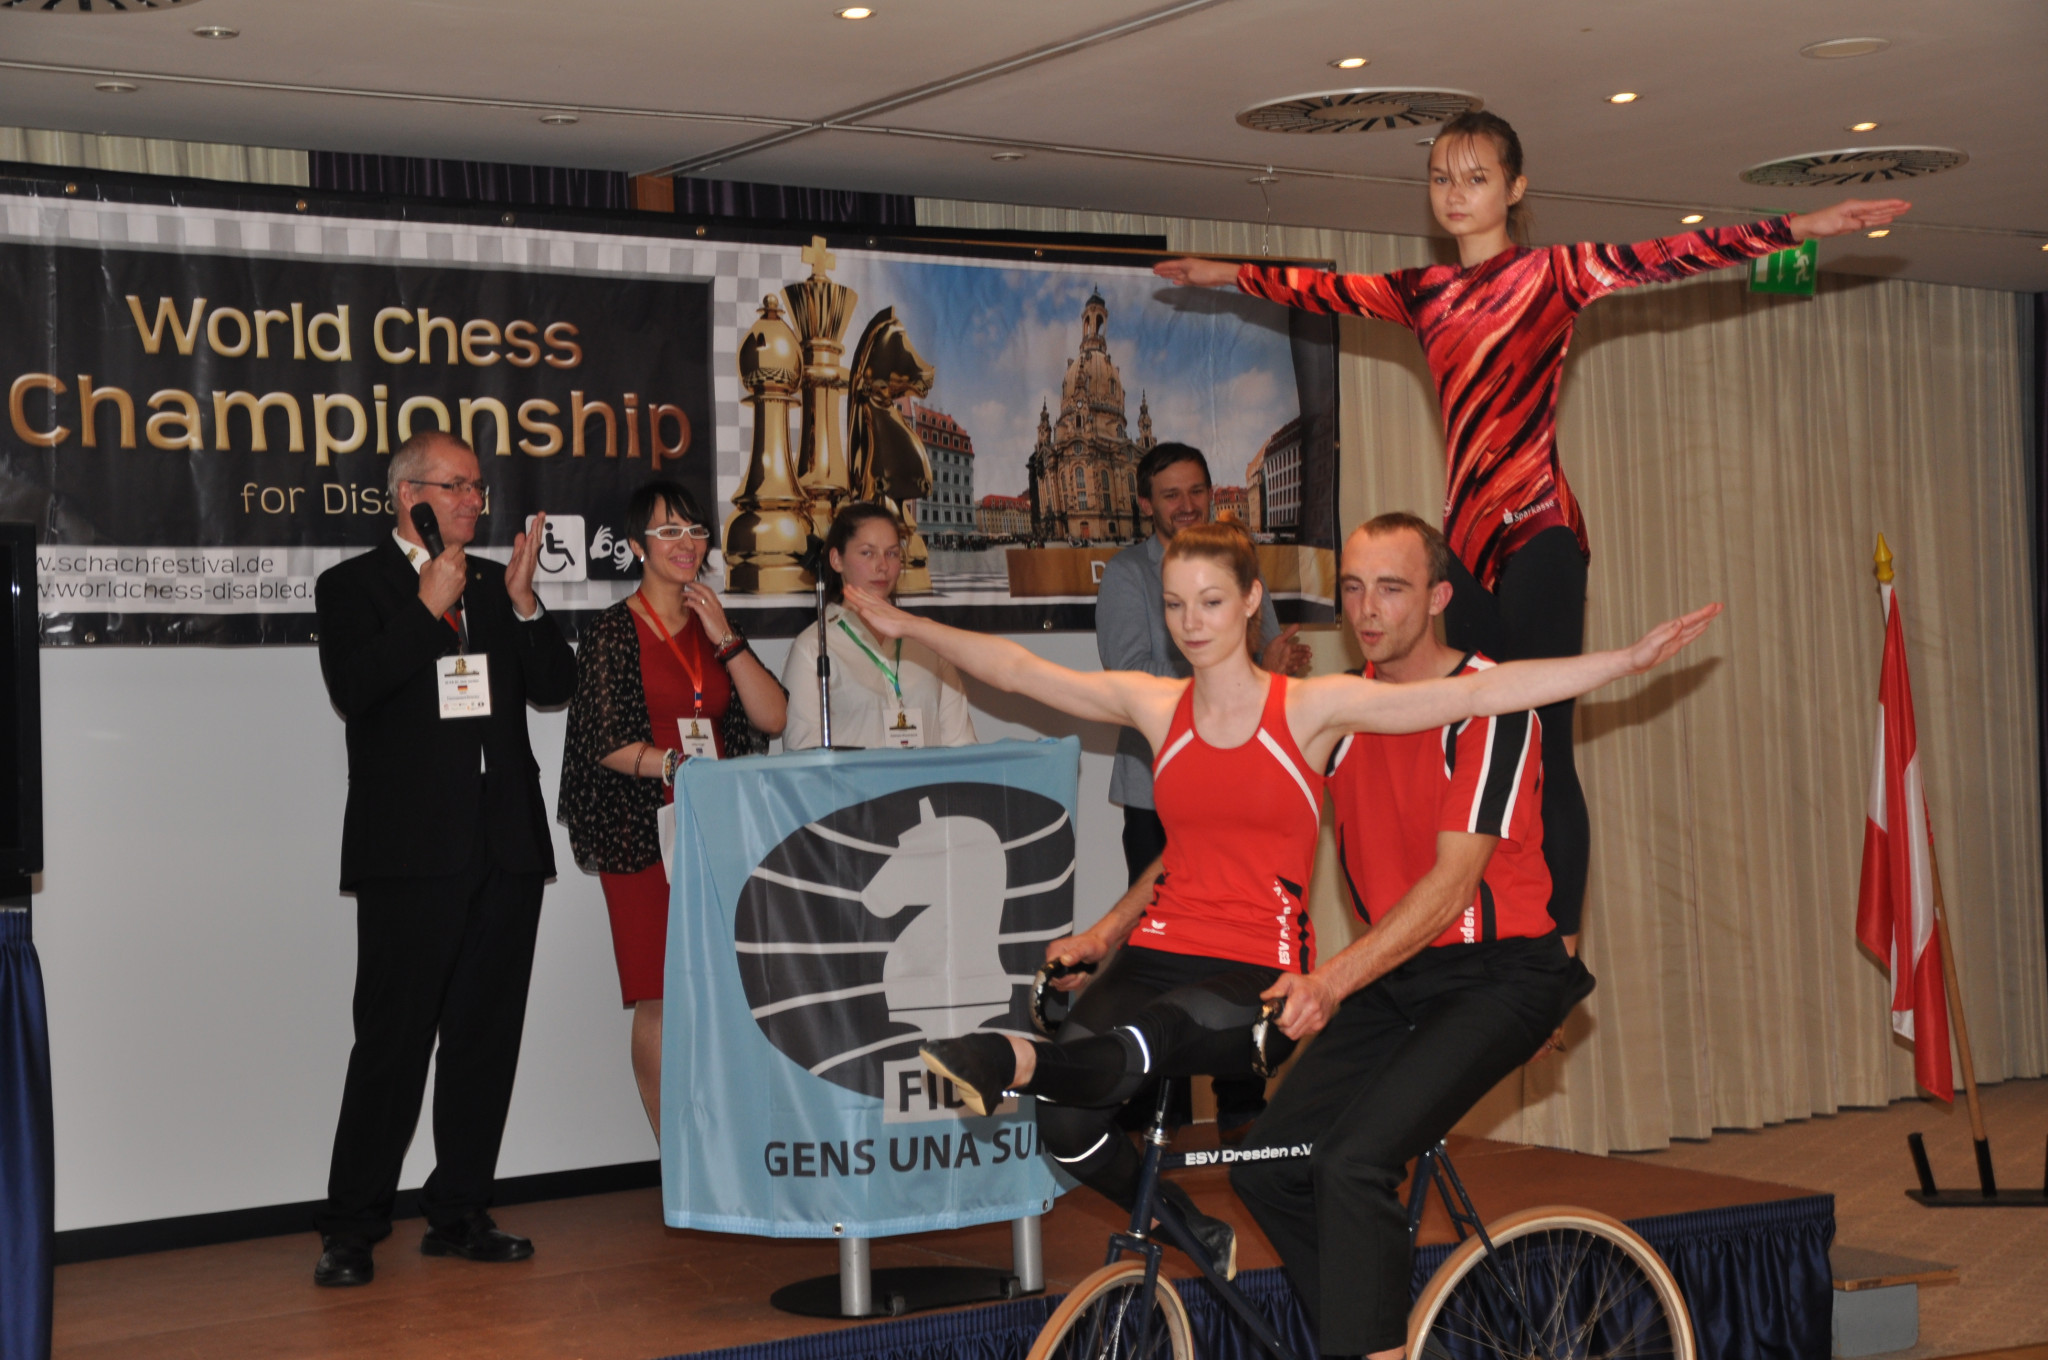 World Chess Championship for the Disabled officially opened as action begins